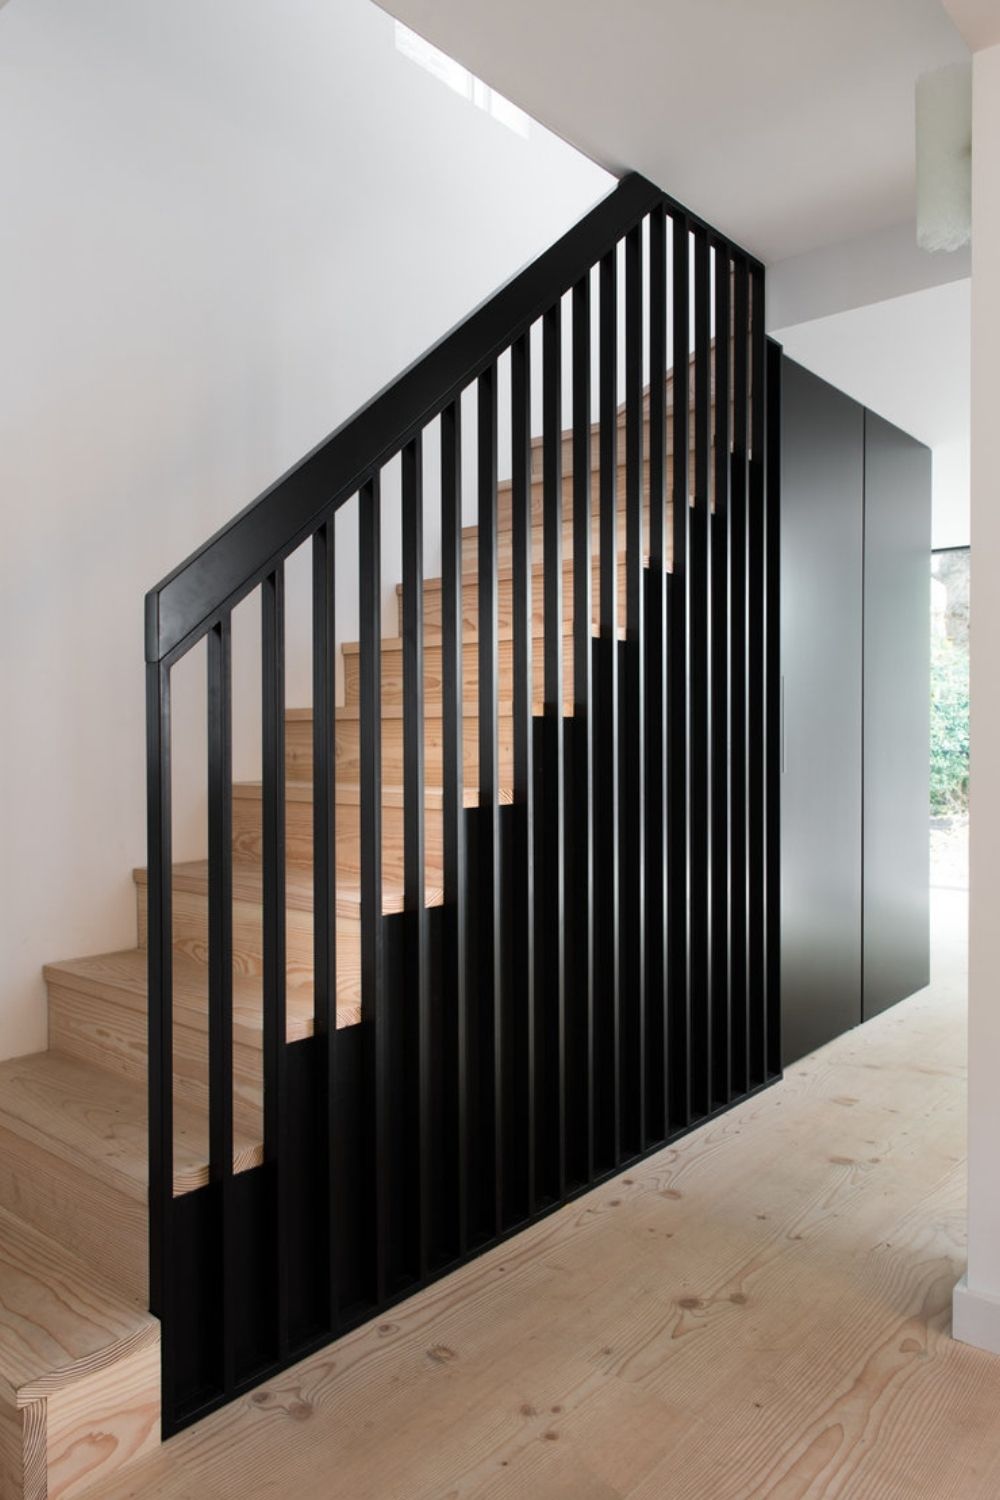 evoke projects ltd bespoke metal and timber stairwell